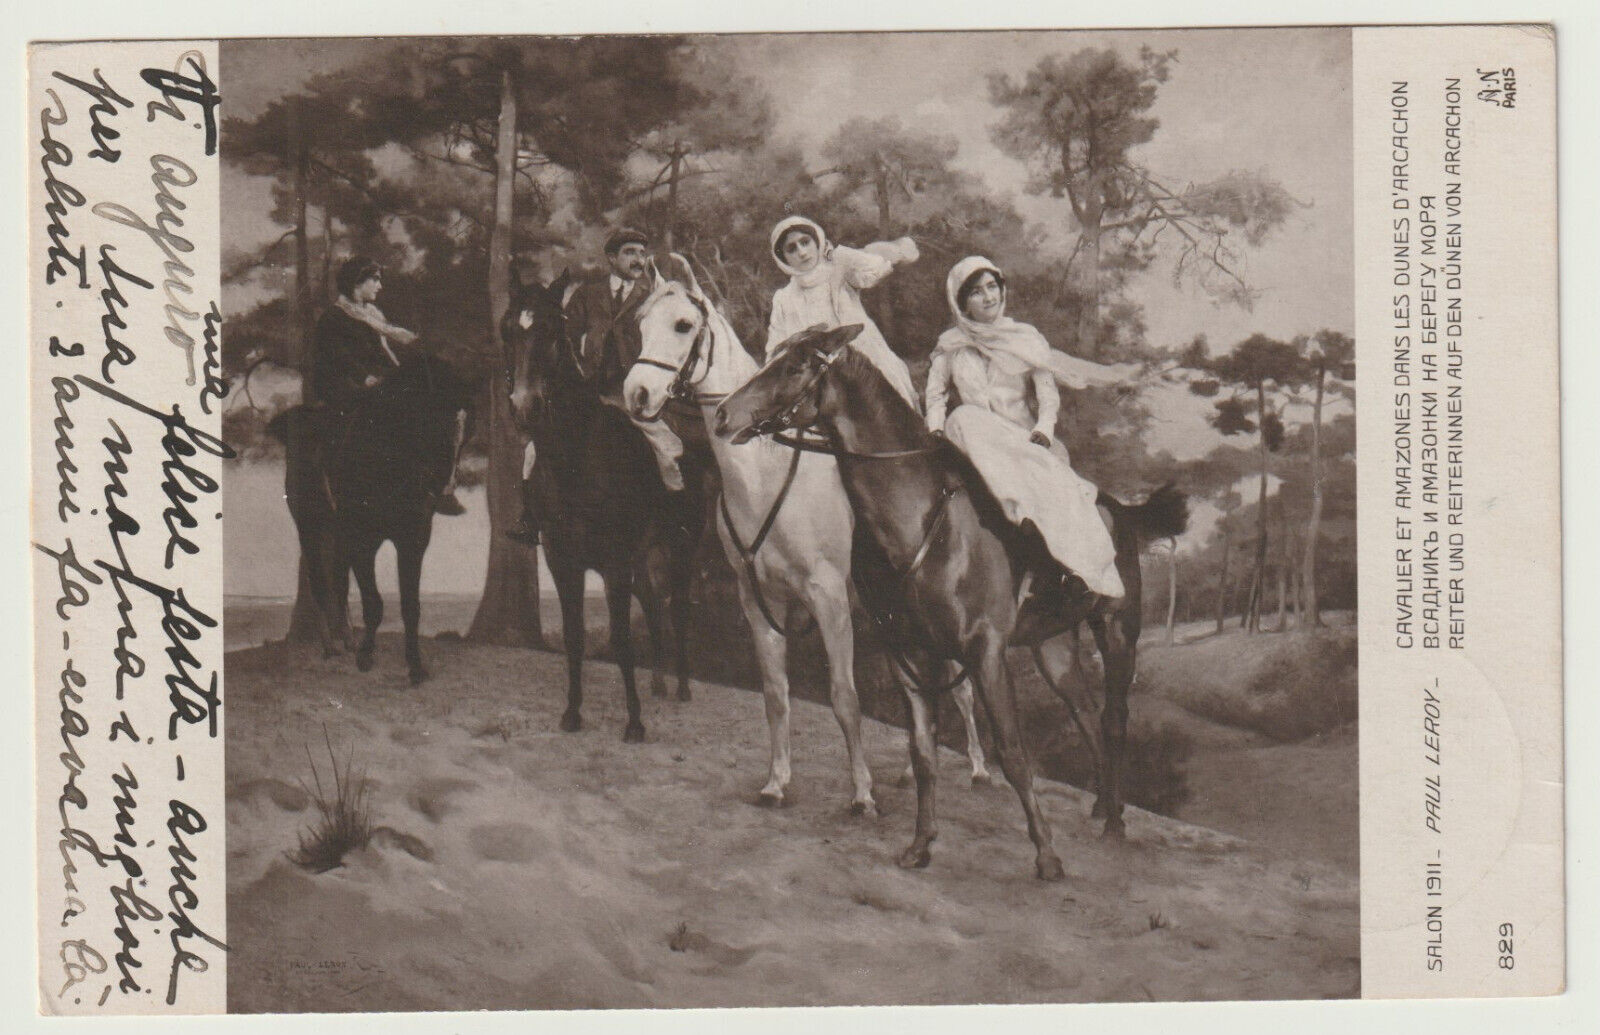 cpa P. LEROY - Rider and Amazons in the dunes of ARCHACHON - vg 1912 - pf